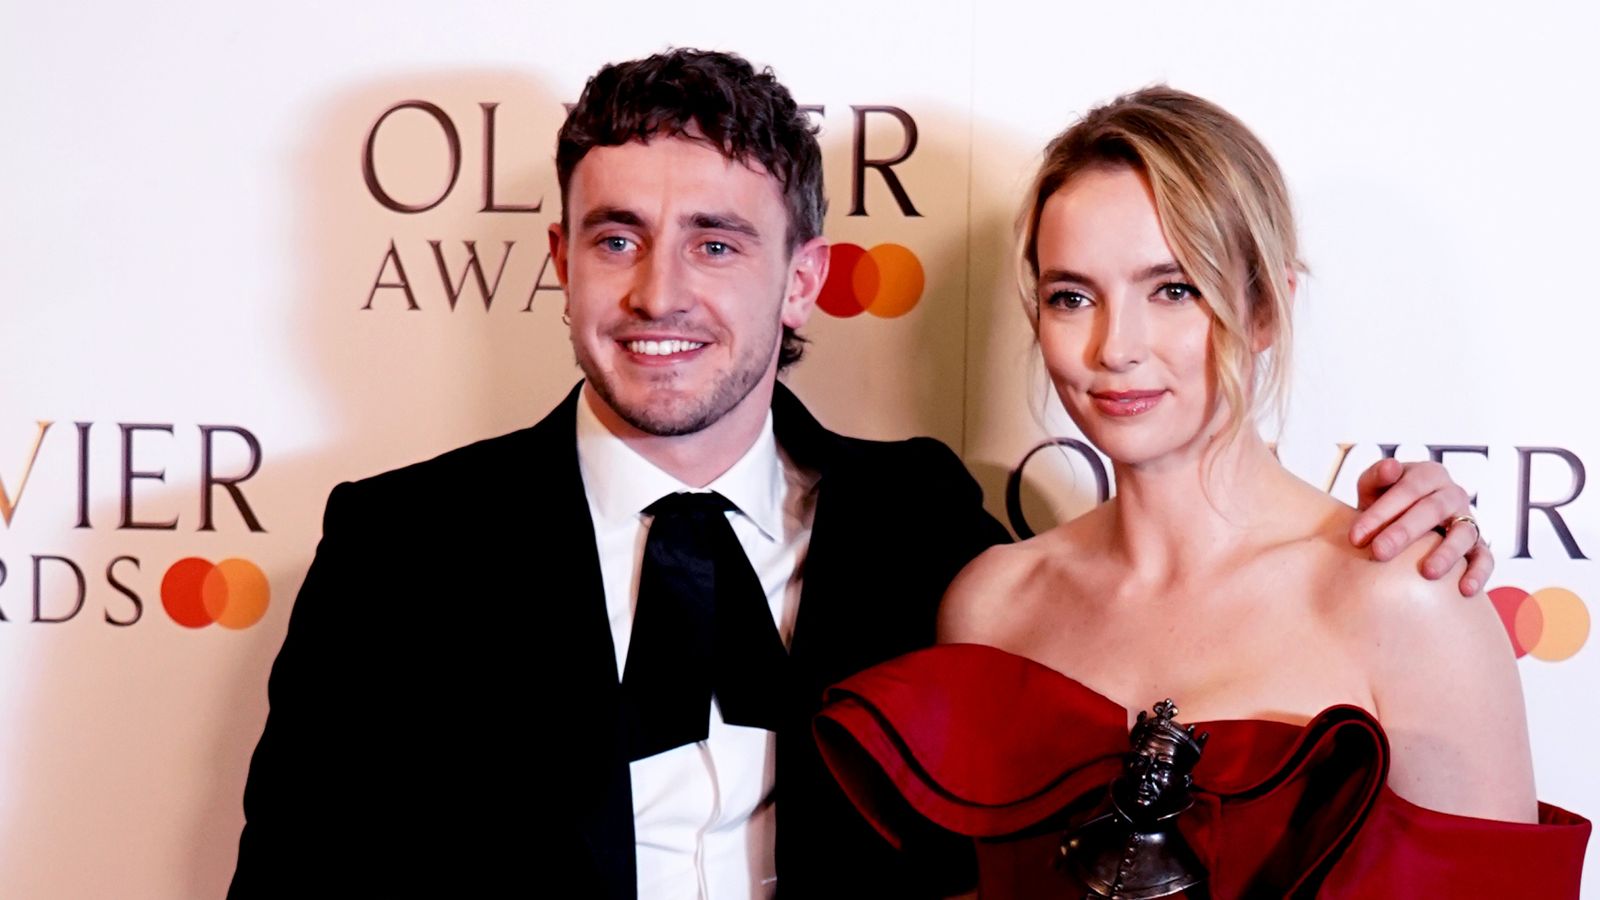 Olivier Awards: Jodie Comer and Paul Mescal win acting trophies as My Neighbour Totoro sweeps the board